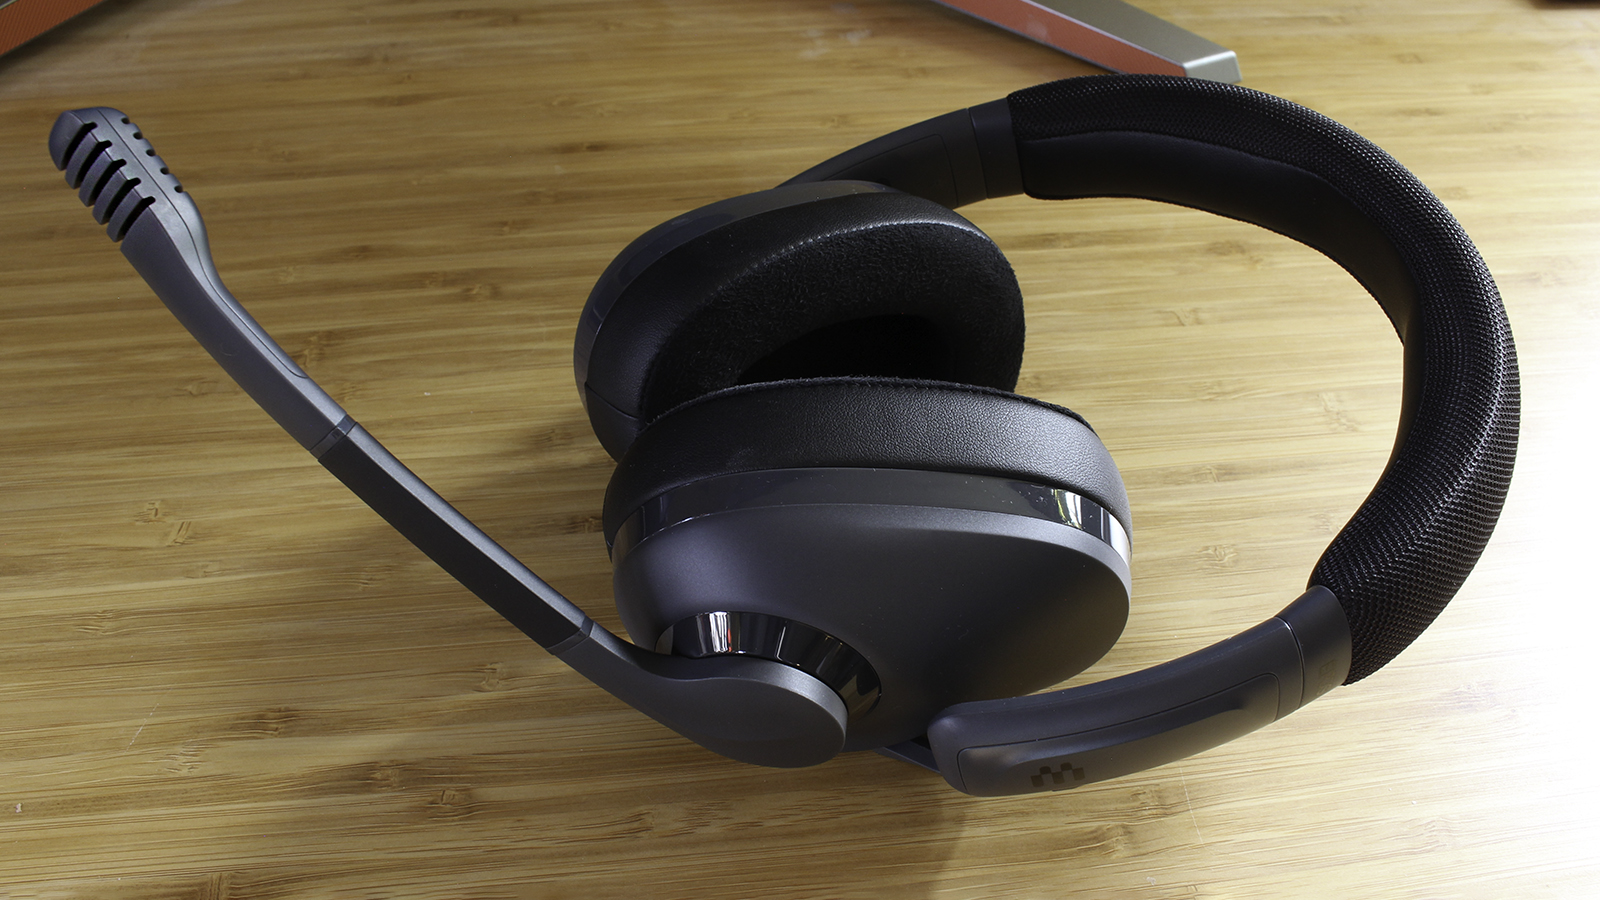 Drop + Epos H3X Headset review: Best sub-$100 gaming headset